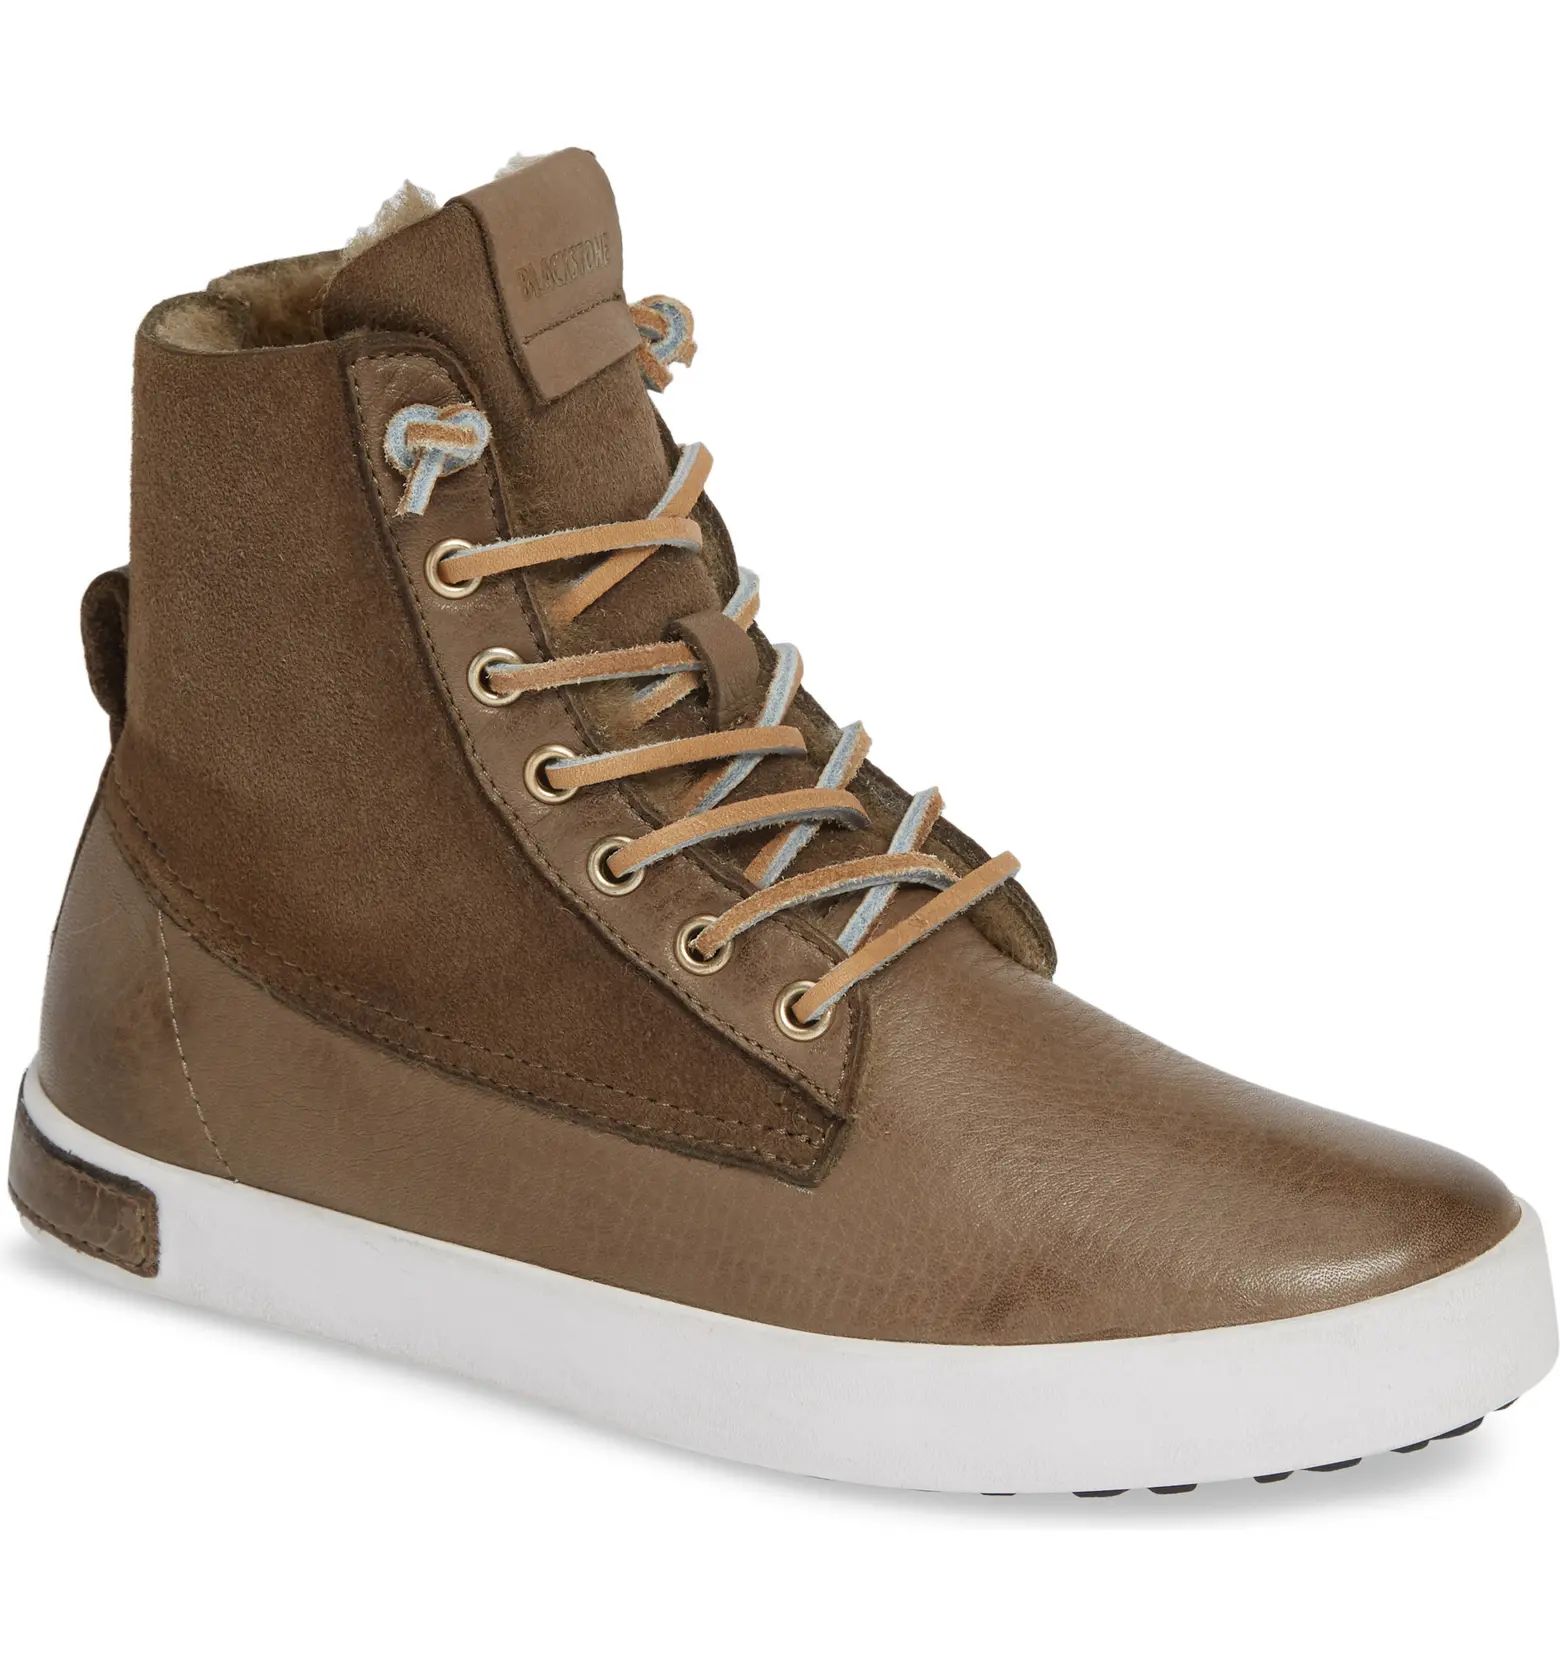 QL46 Genuine Shearling Lined Sneaker Boot | Nordstrom